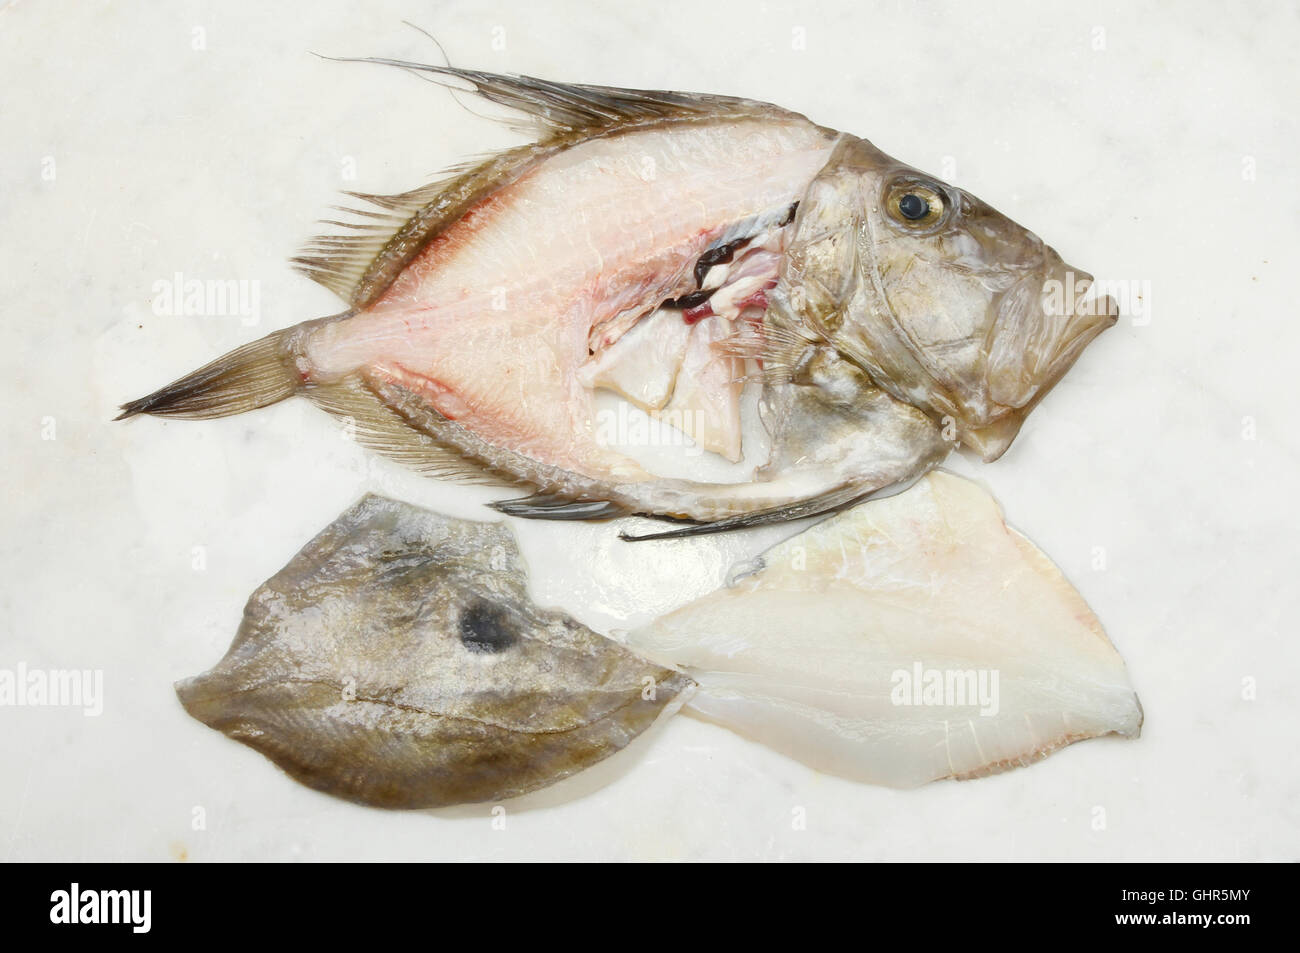 Filleted John Dory fish on a marble slab Stock Photo